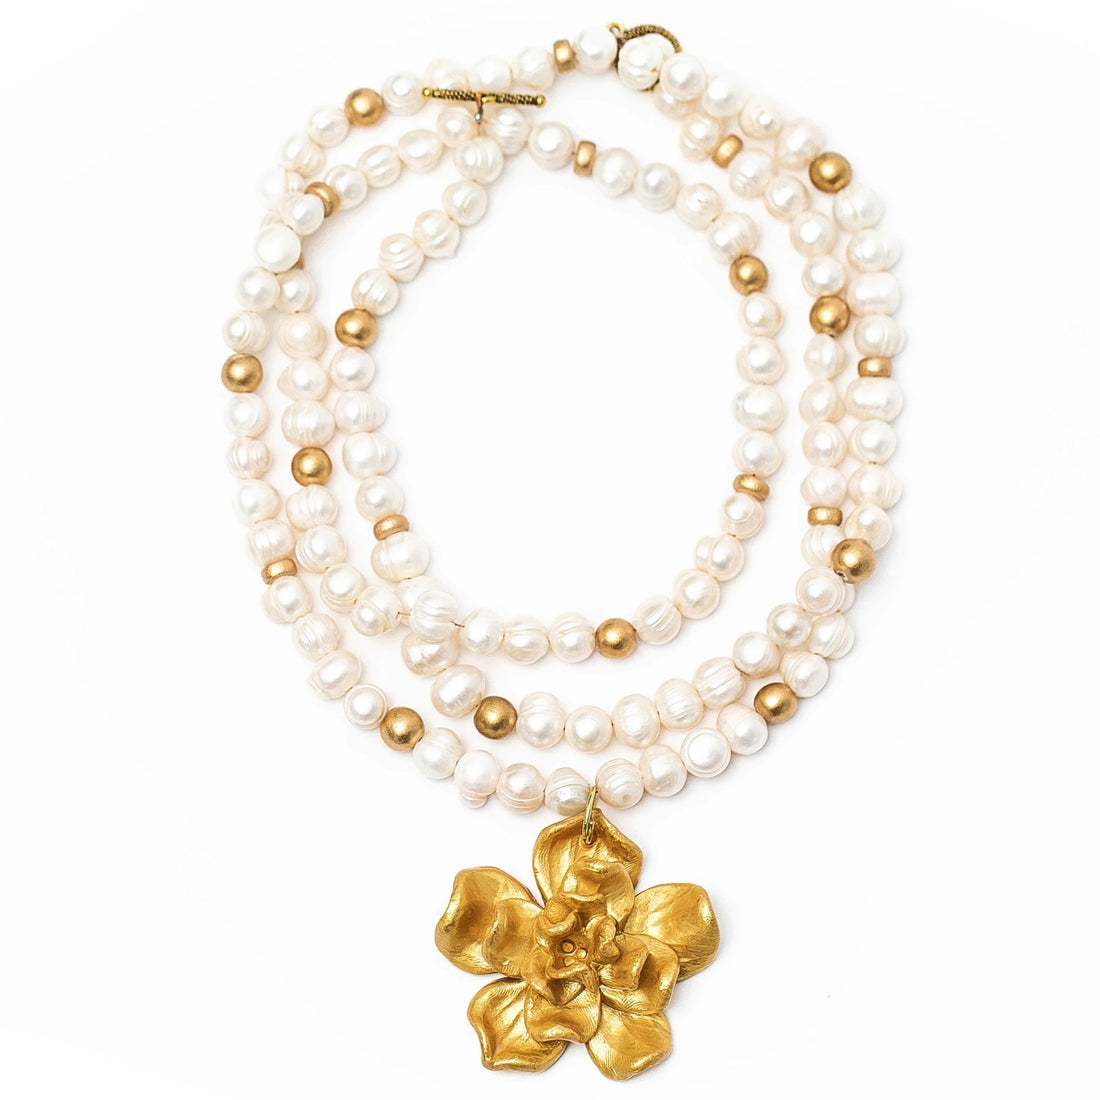 3-Strand Freshwater Pearls with Camellia Blossom